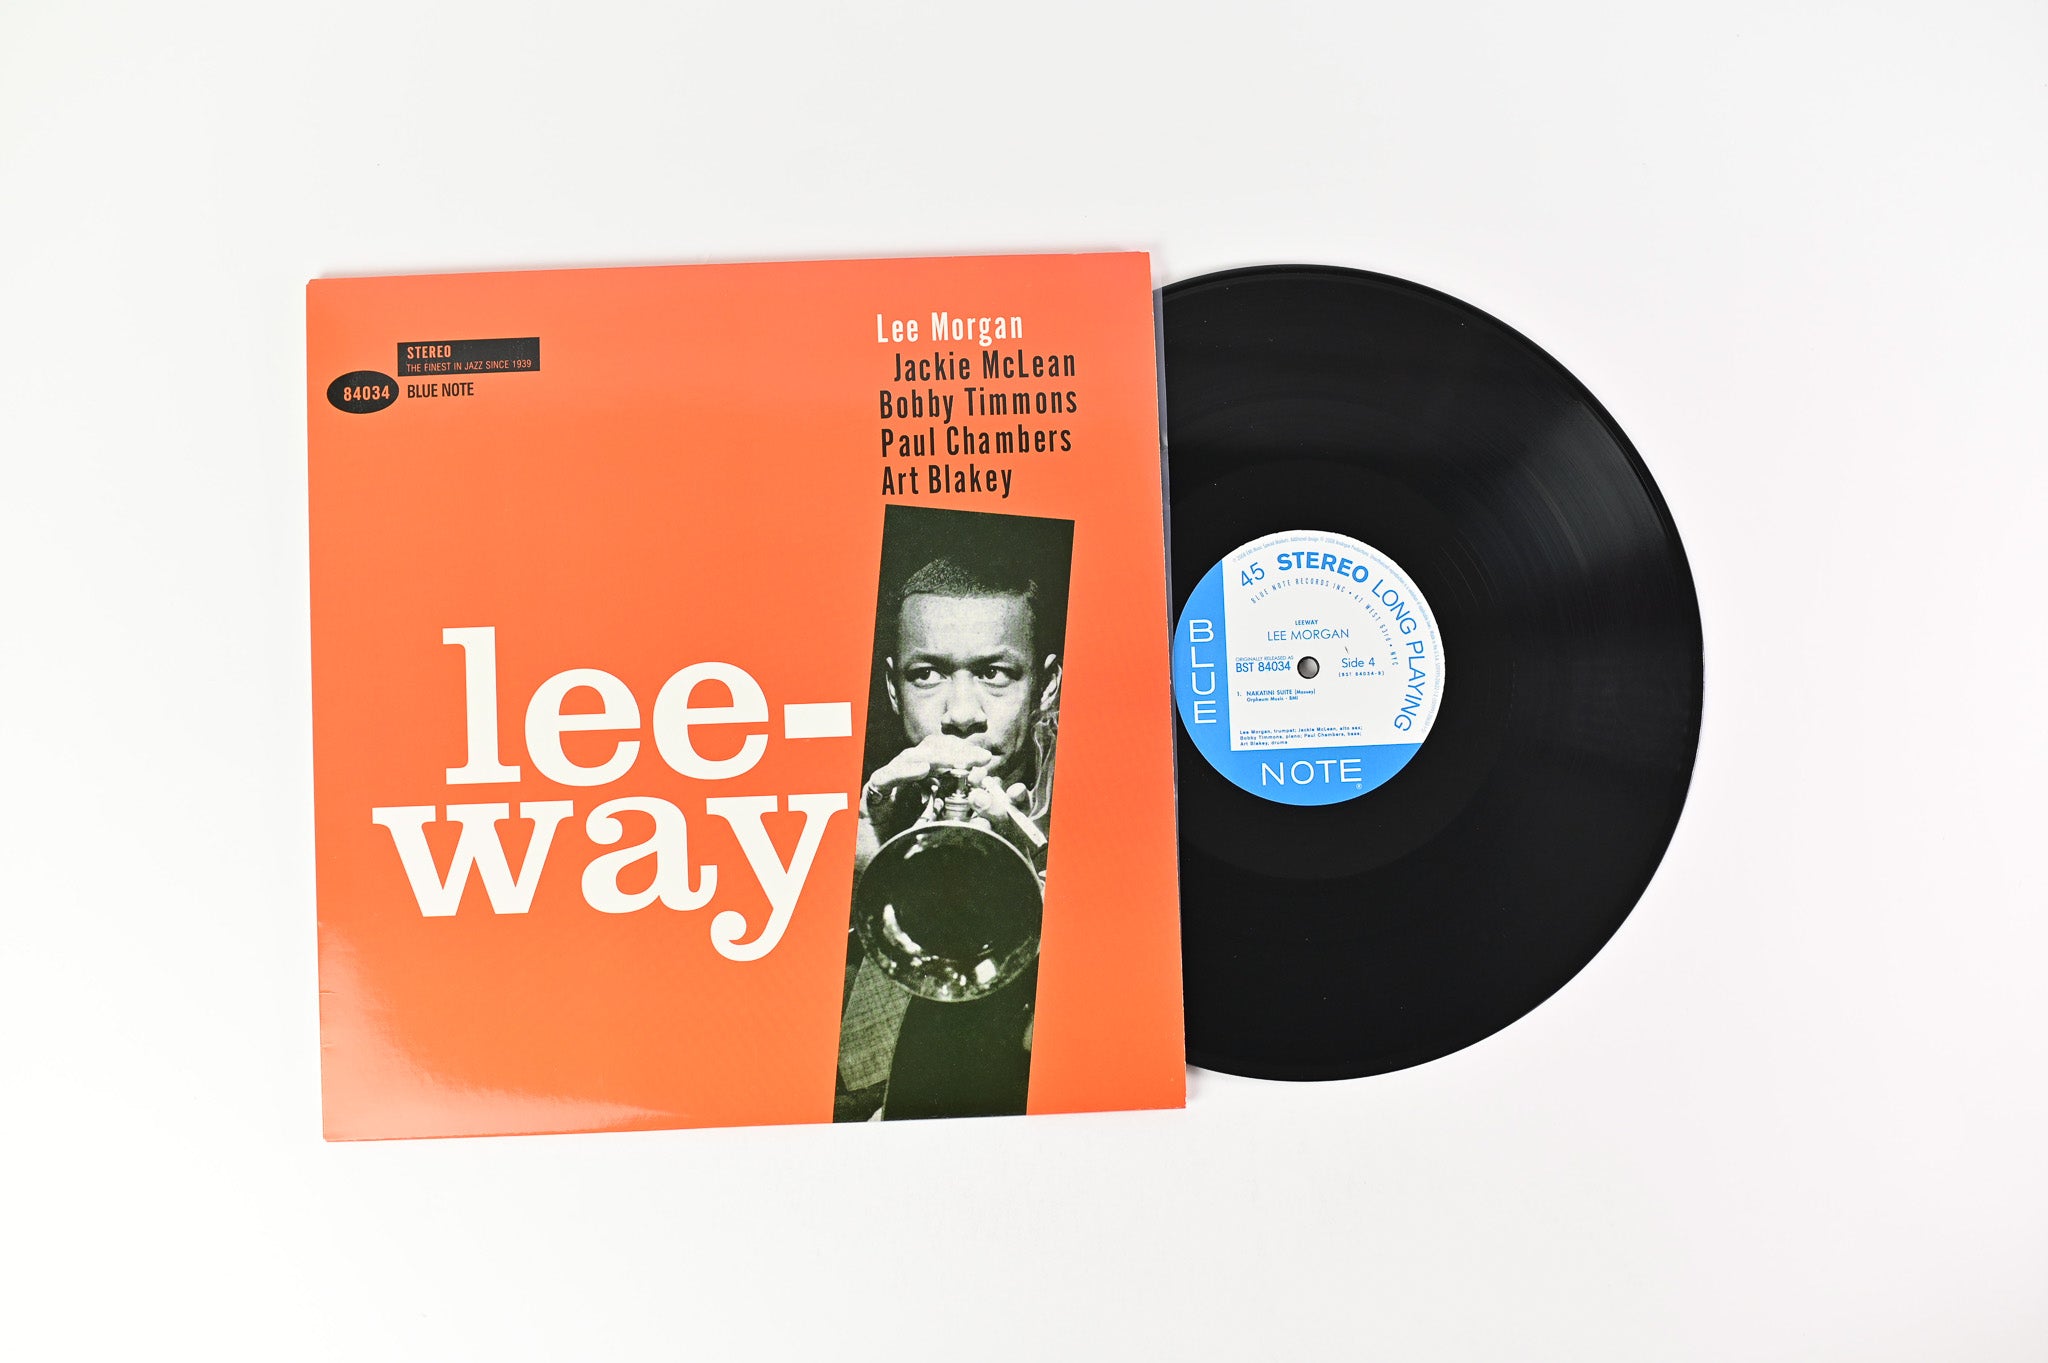 Lee Morgan - Leeway on Blue Note Analogue Productions Ltd Numbered 45 RPM Reissue